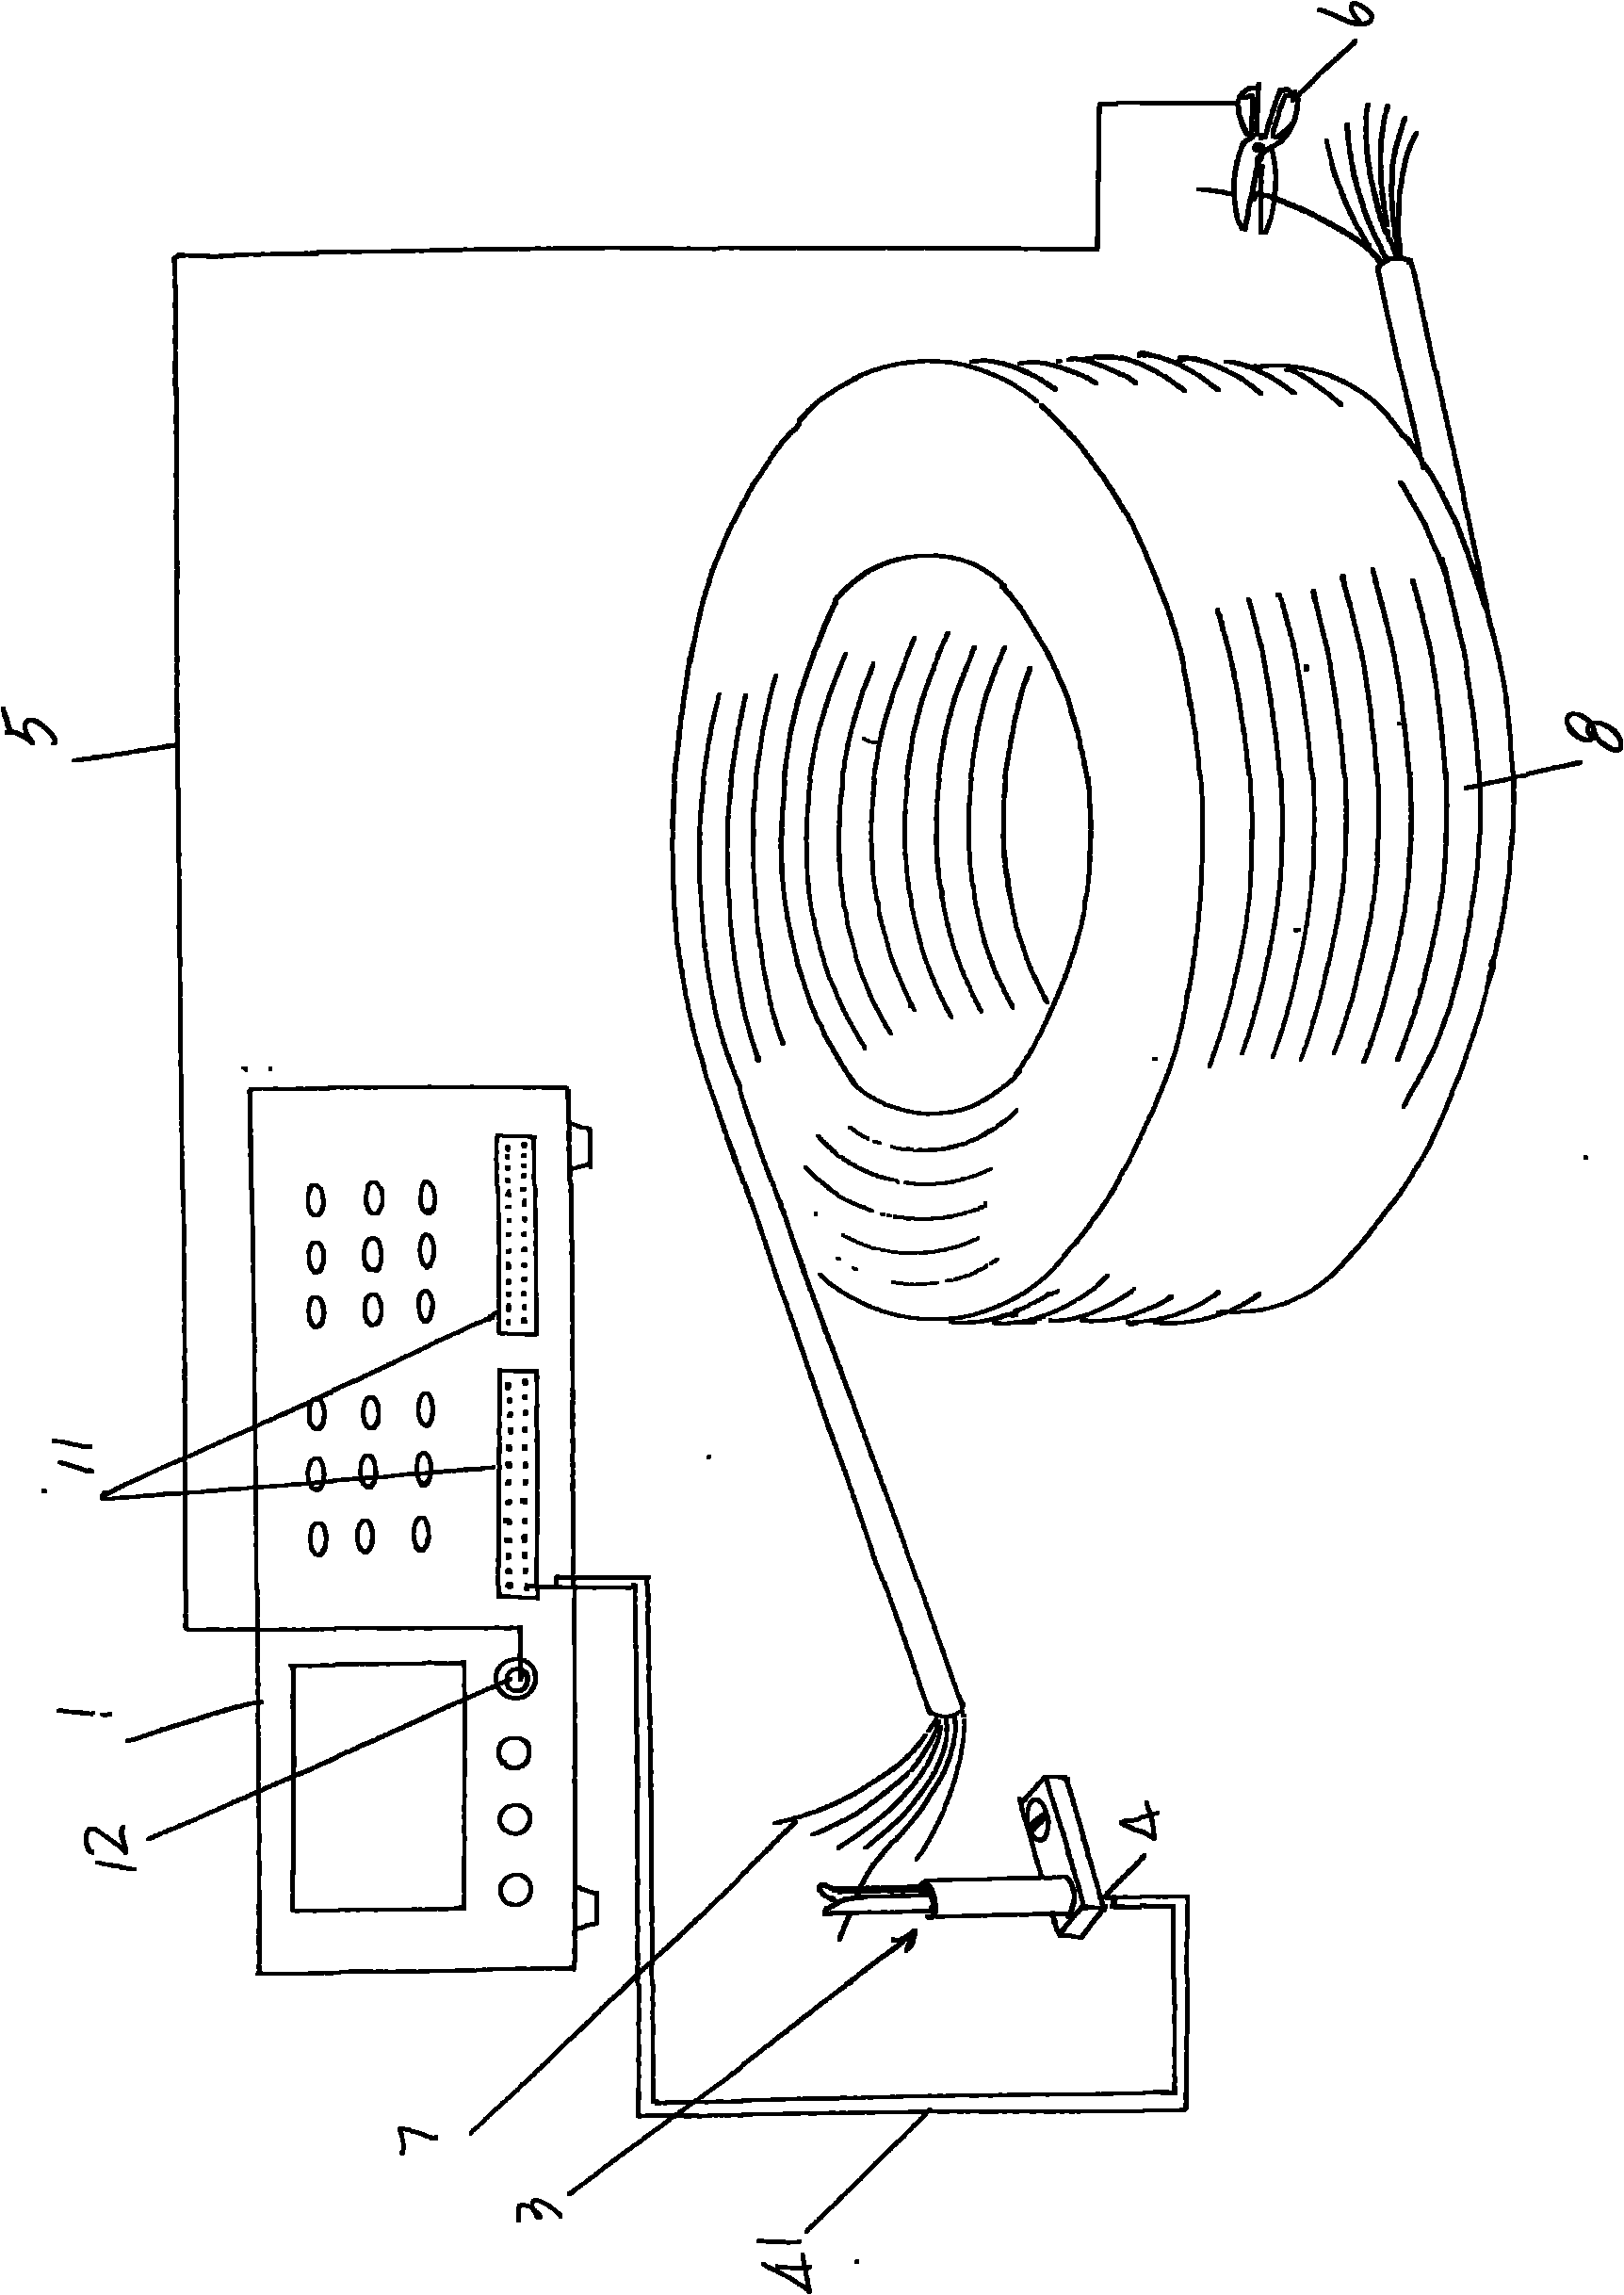 Detection mechanism of circuit breaking and short circuit of wires and cables